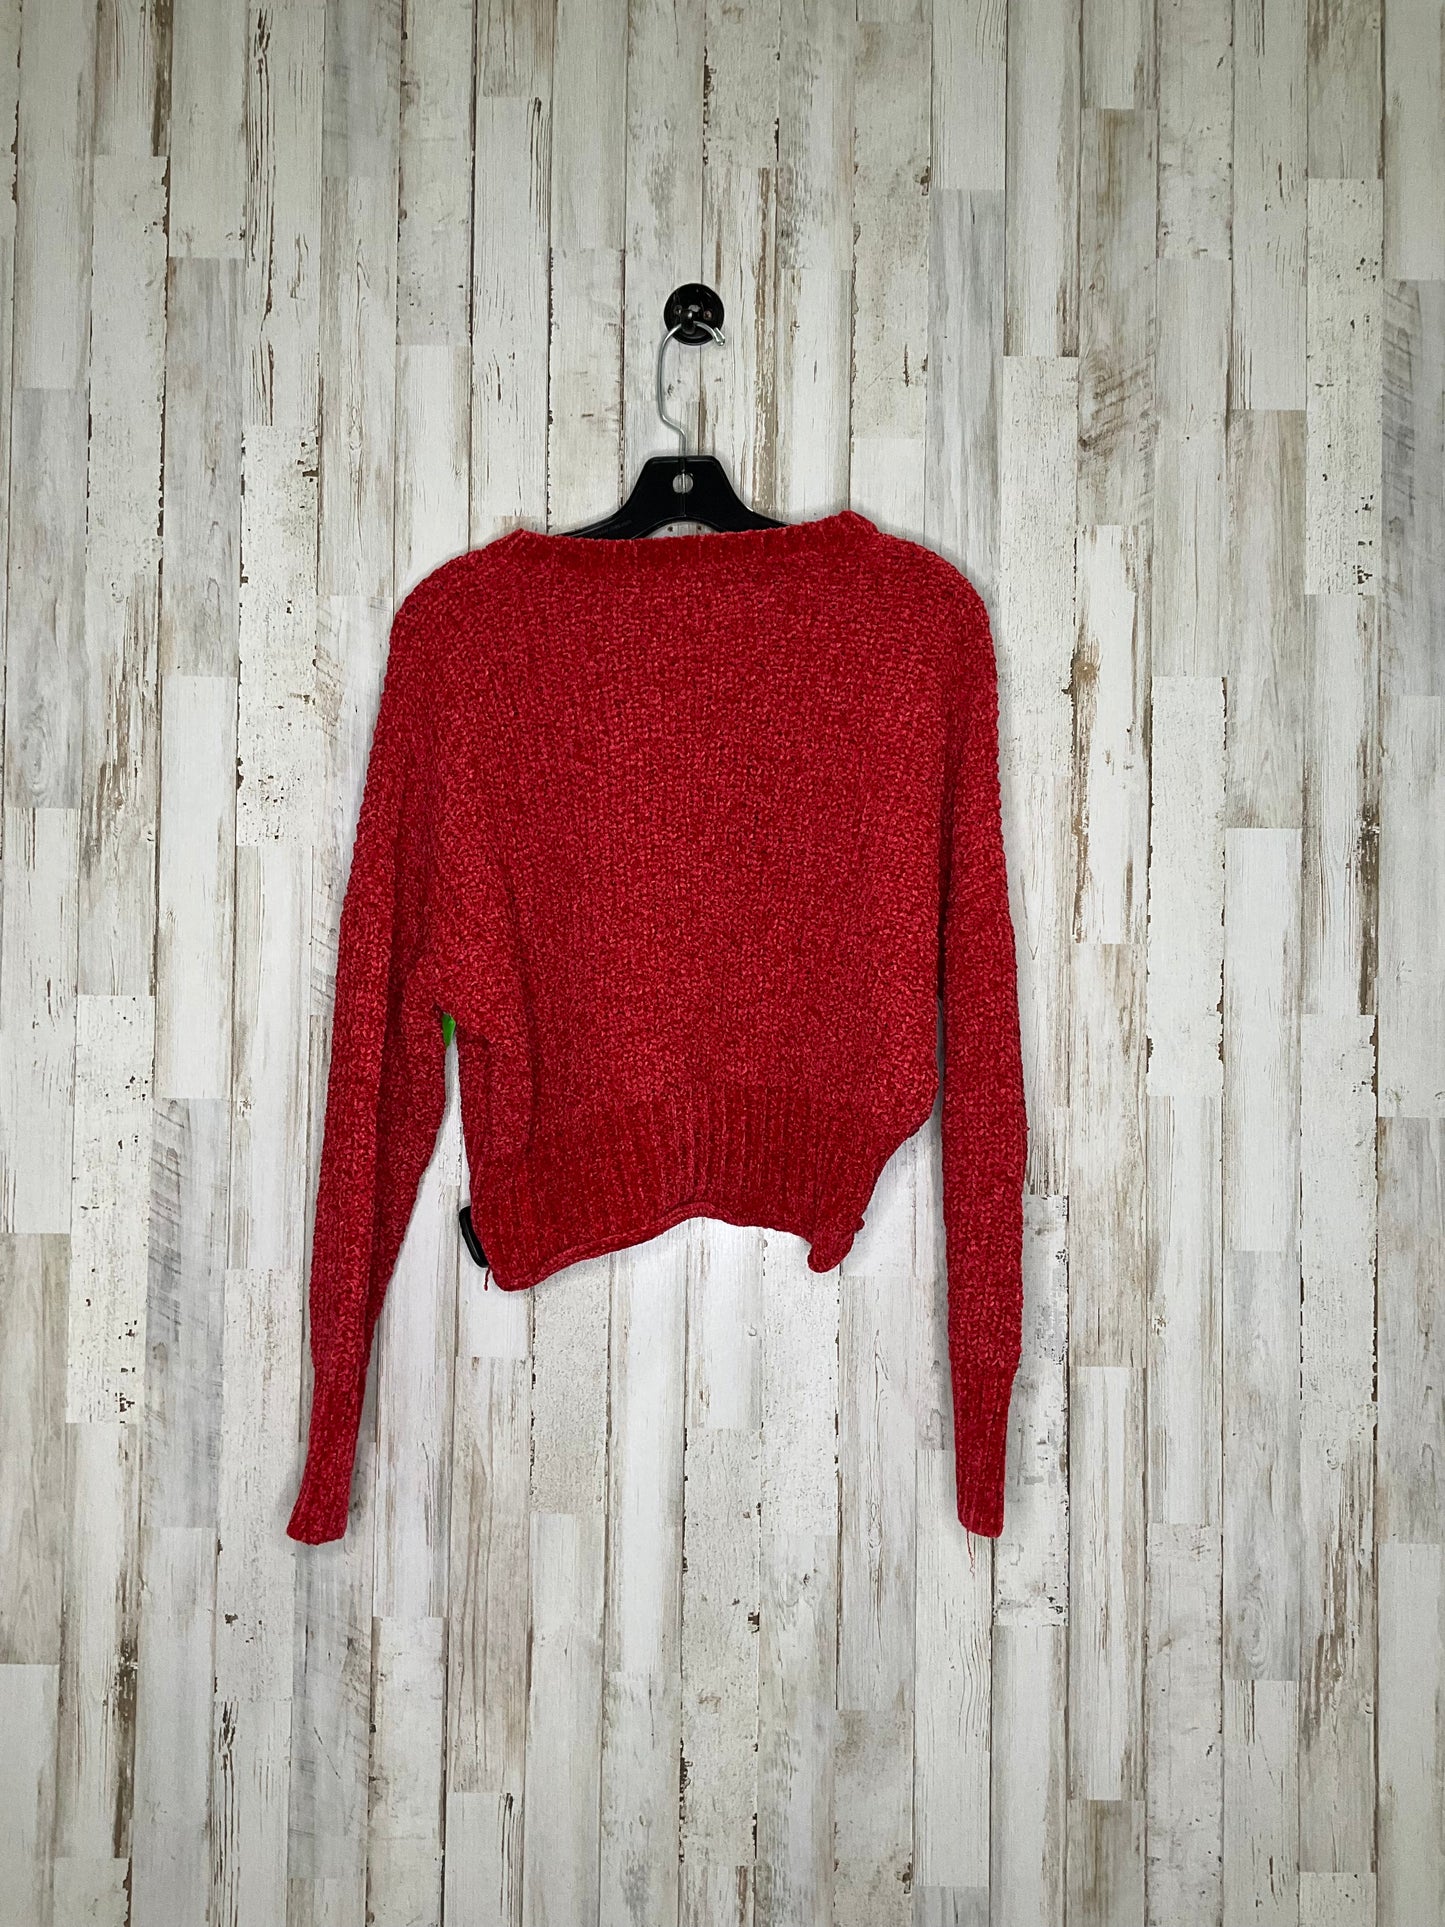 Sweater By Altard State  Size: Xs